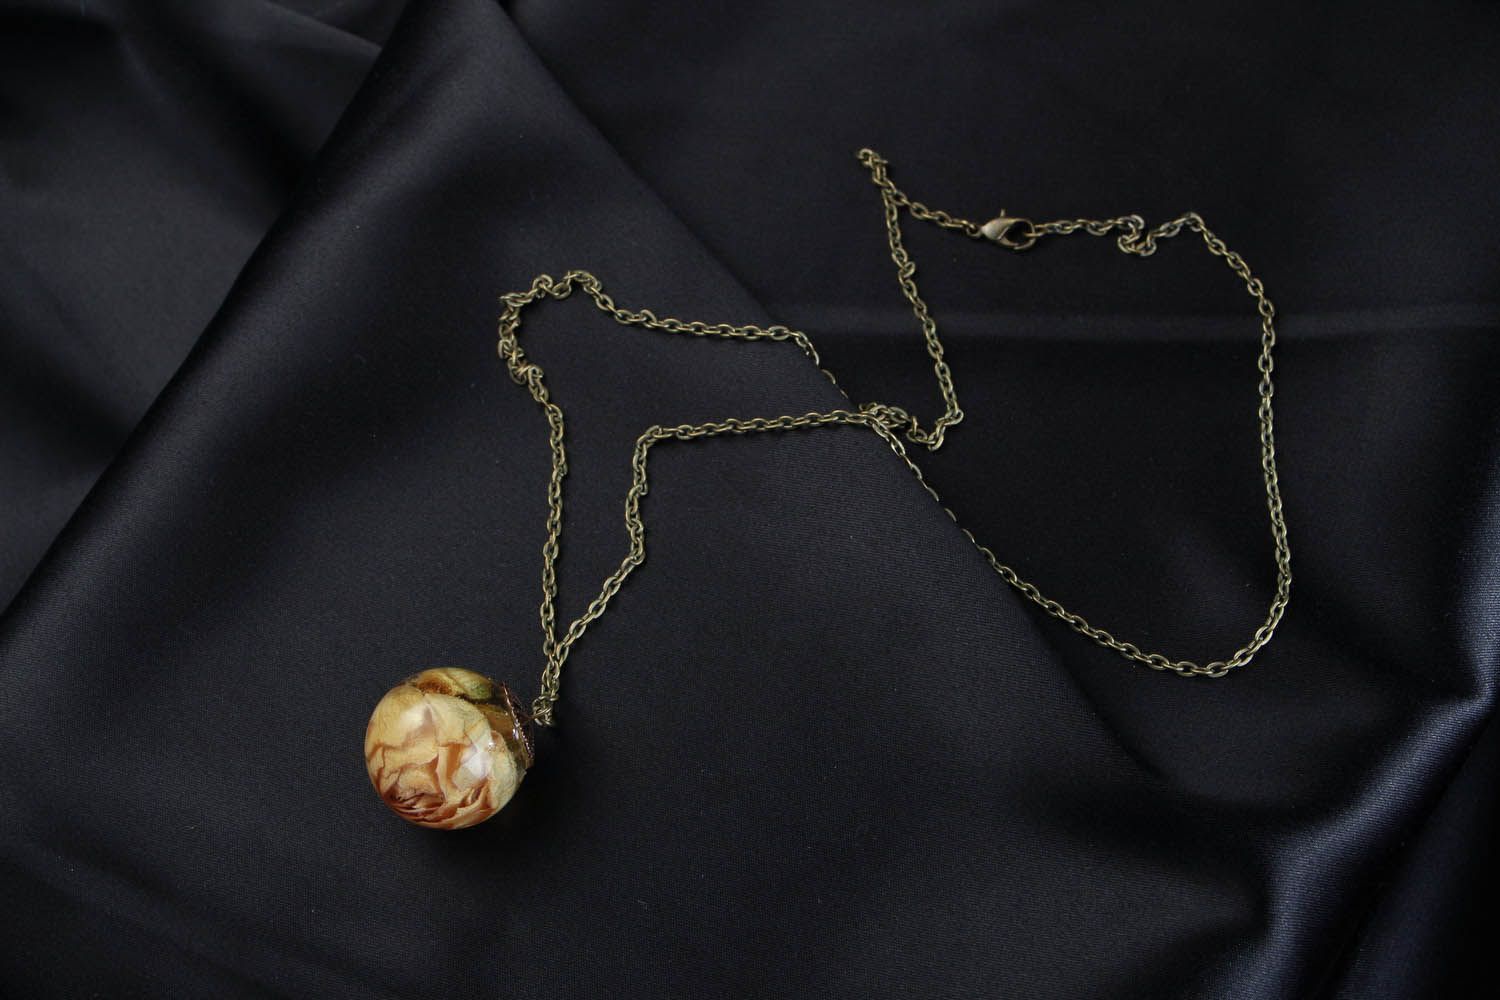 Pendant with a yellow rose photo 3